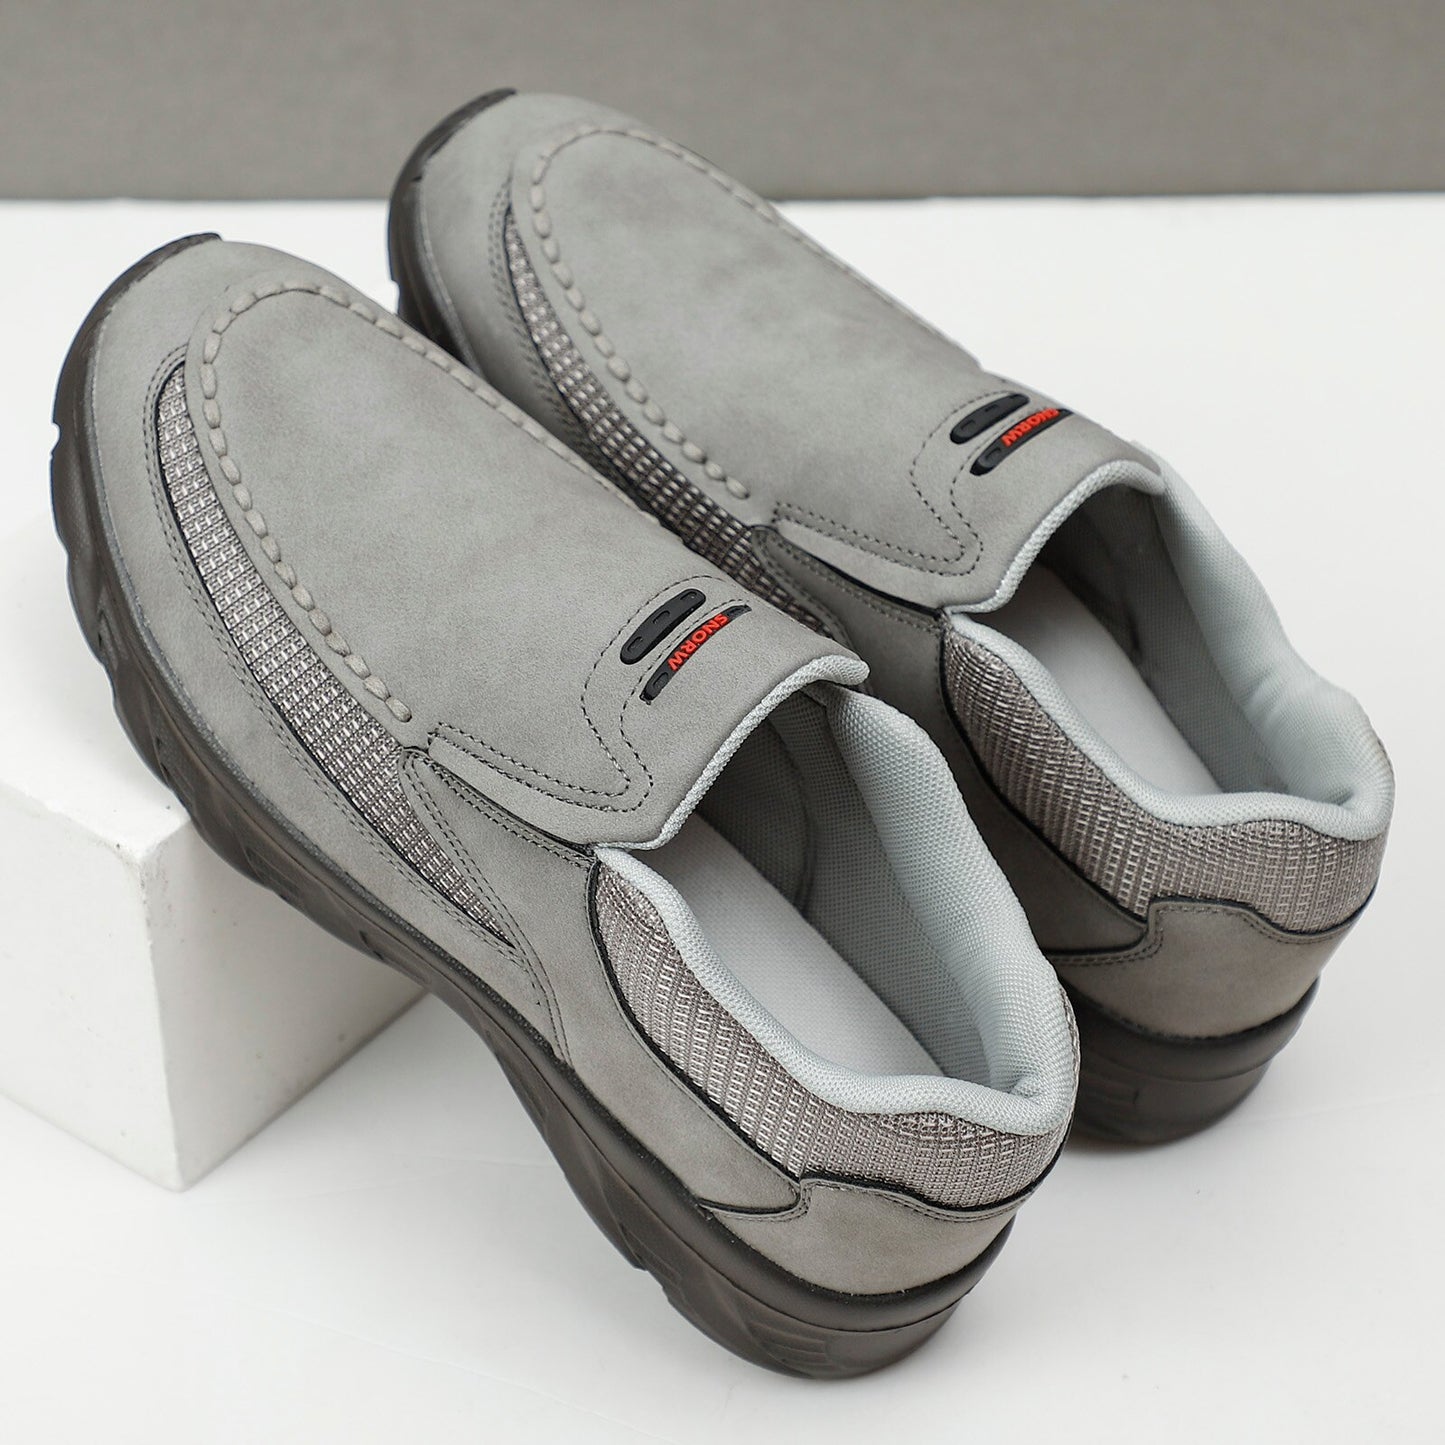 Spring Twilight Grove Loafers